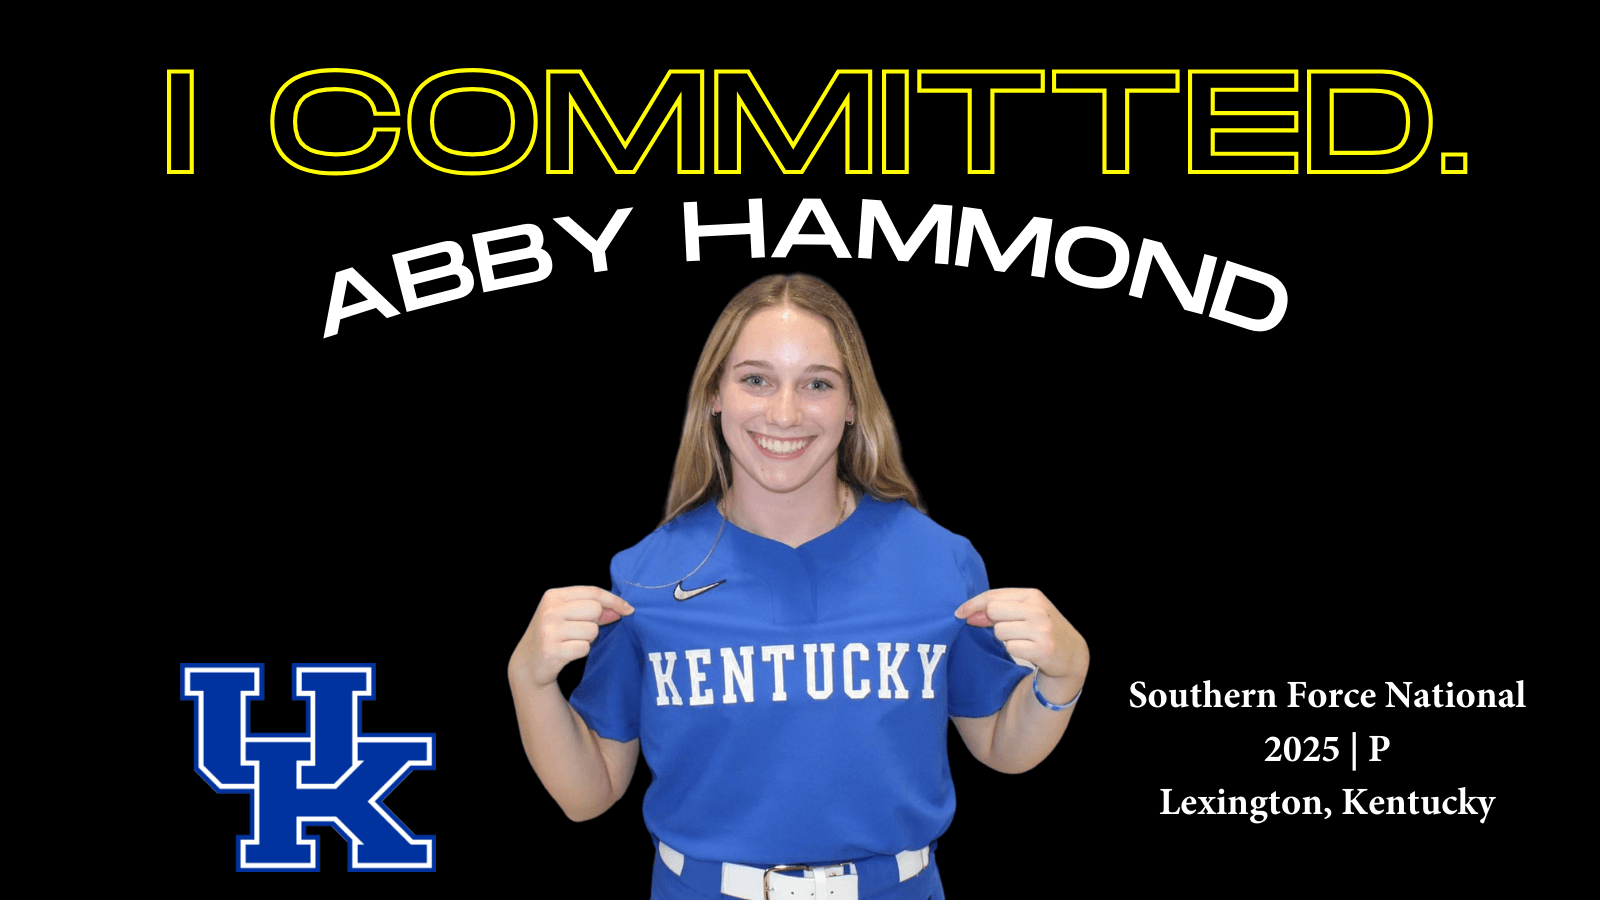 I Committed: Abby Hammond’s Little League Dream of Being A Kentucky Wildcat Comes True